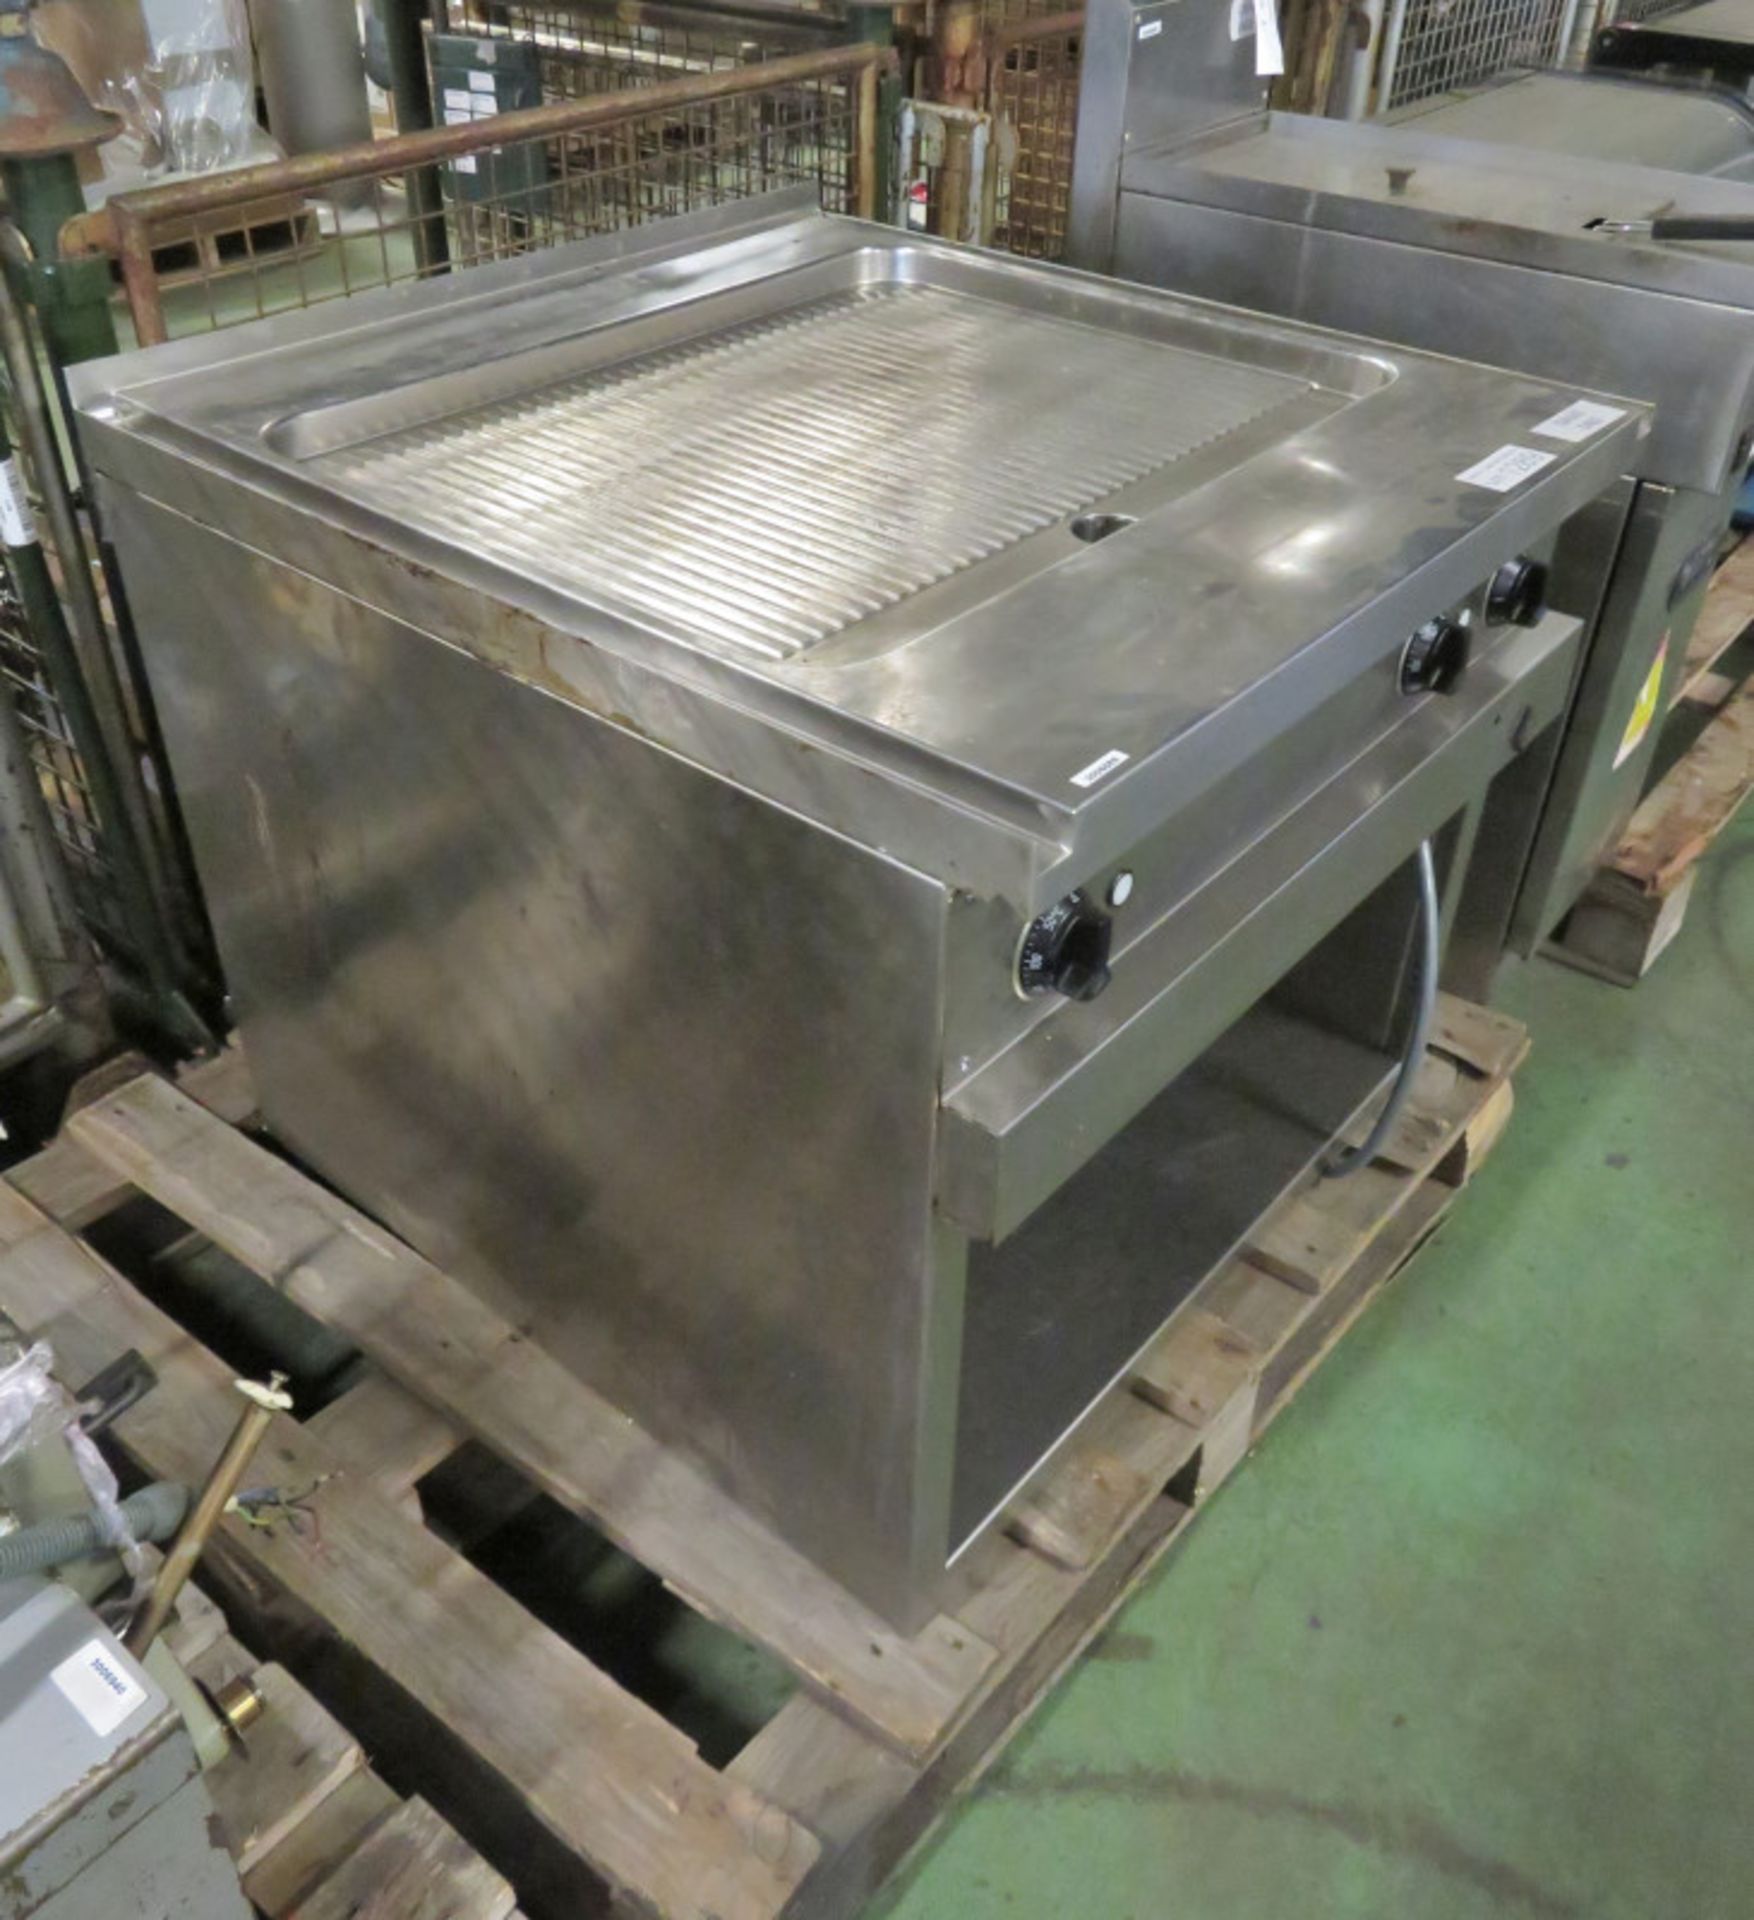 MKN Stainless steel Electric Griddle Plate L 860mm x W 800mm x H 710mm - Image 3 of 3